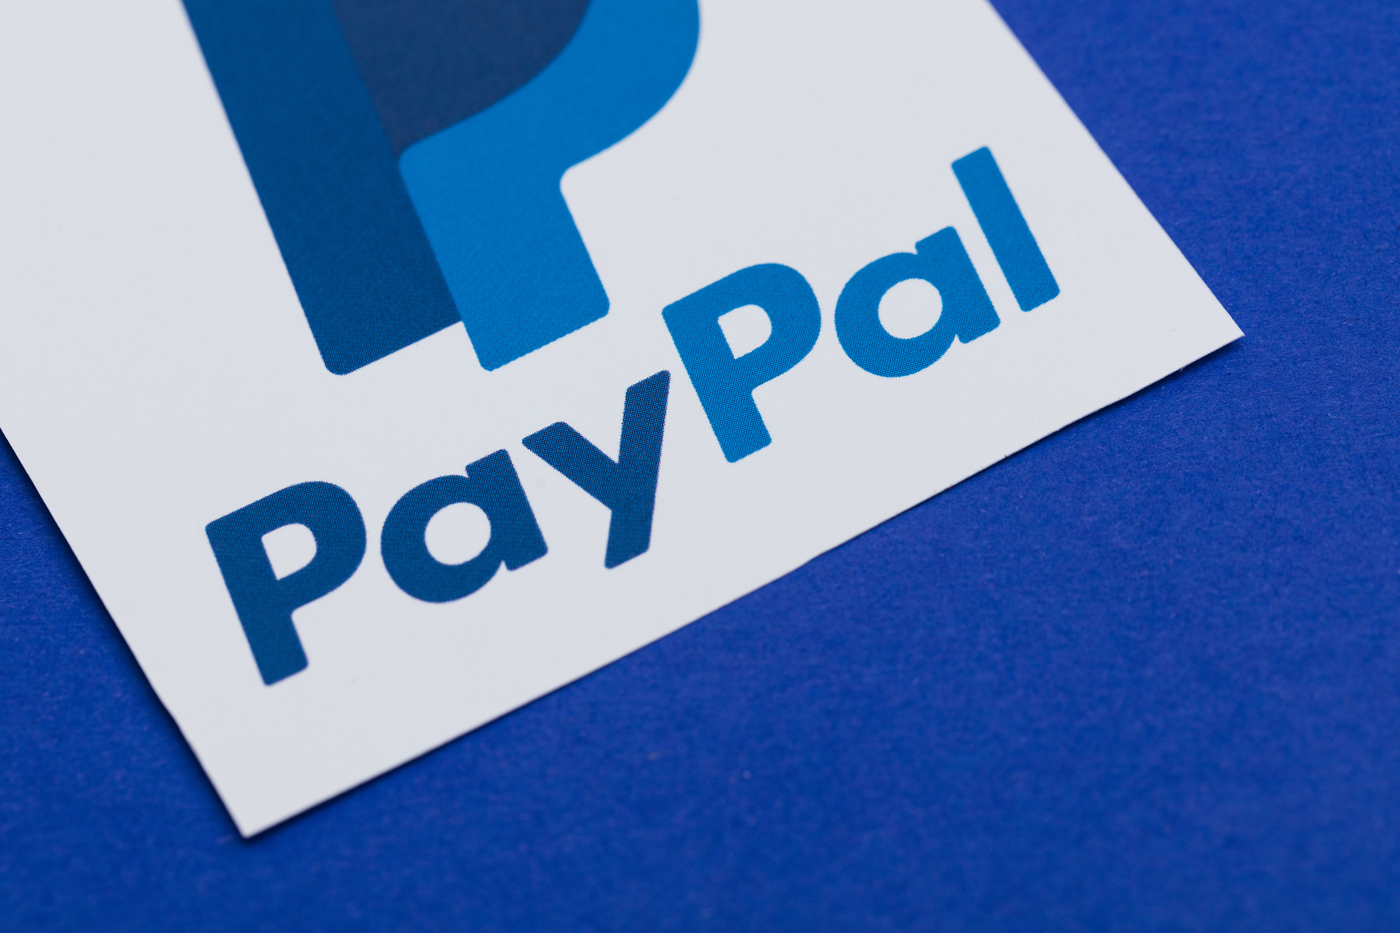 Paypal stock, PYPL stock, Paypal cryptocurrency, banking stocks